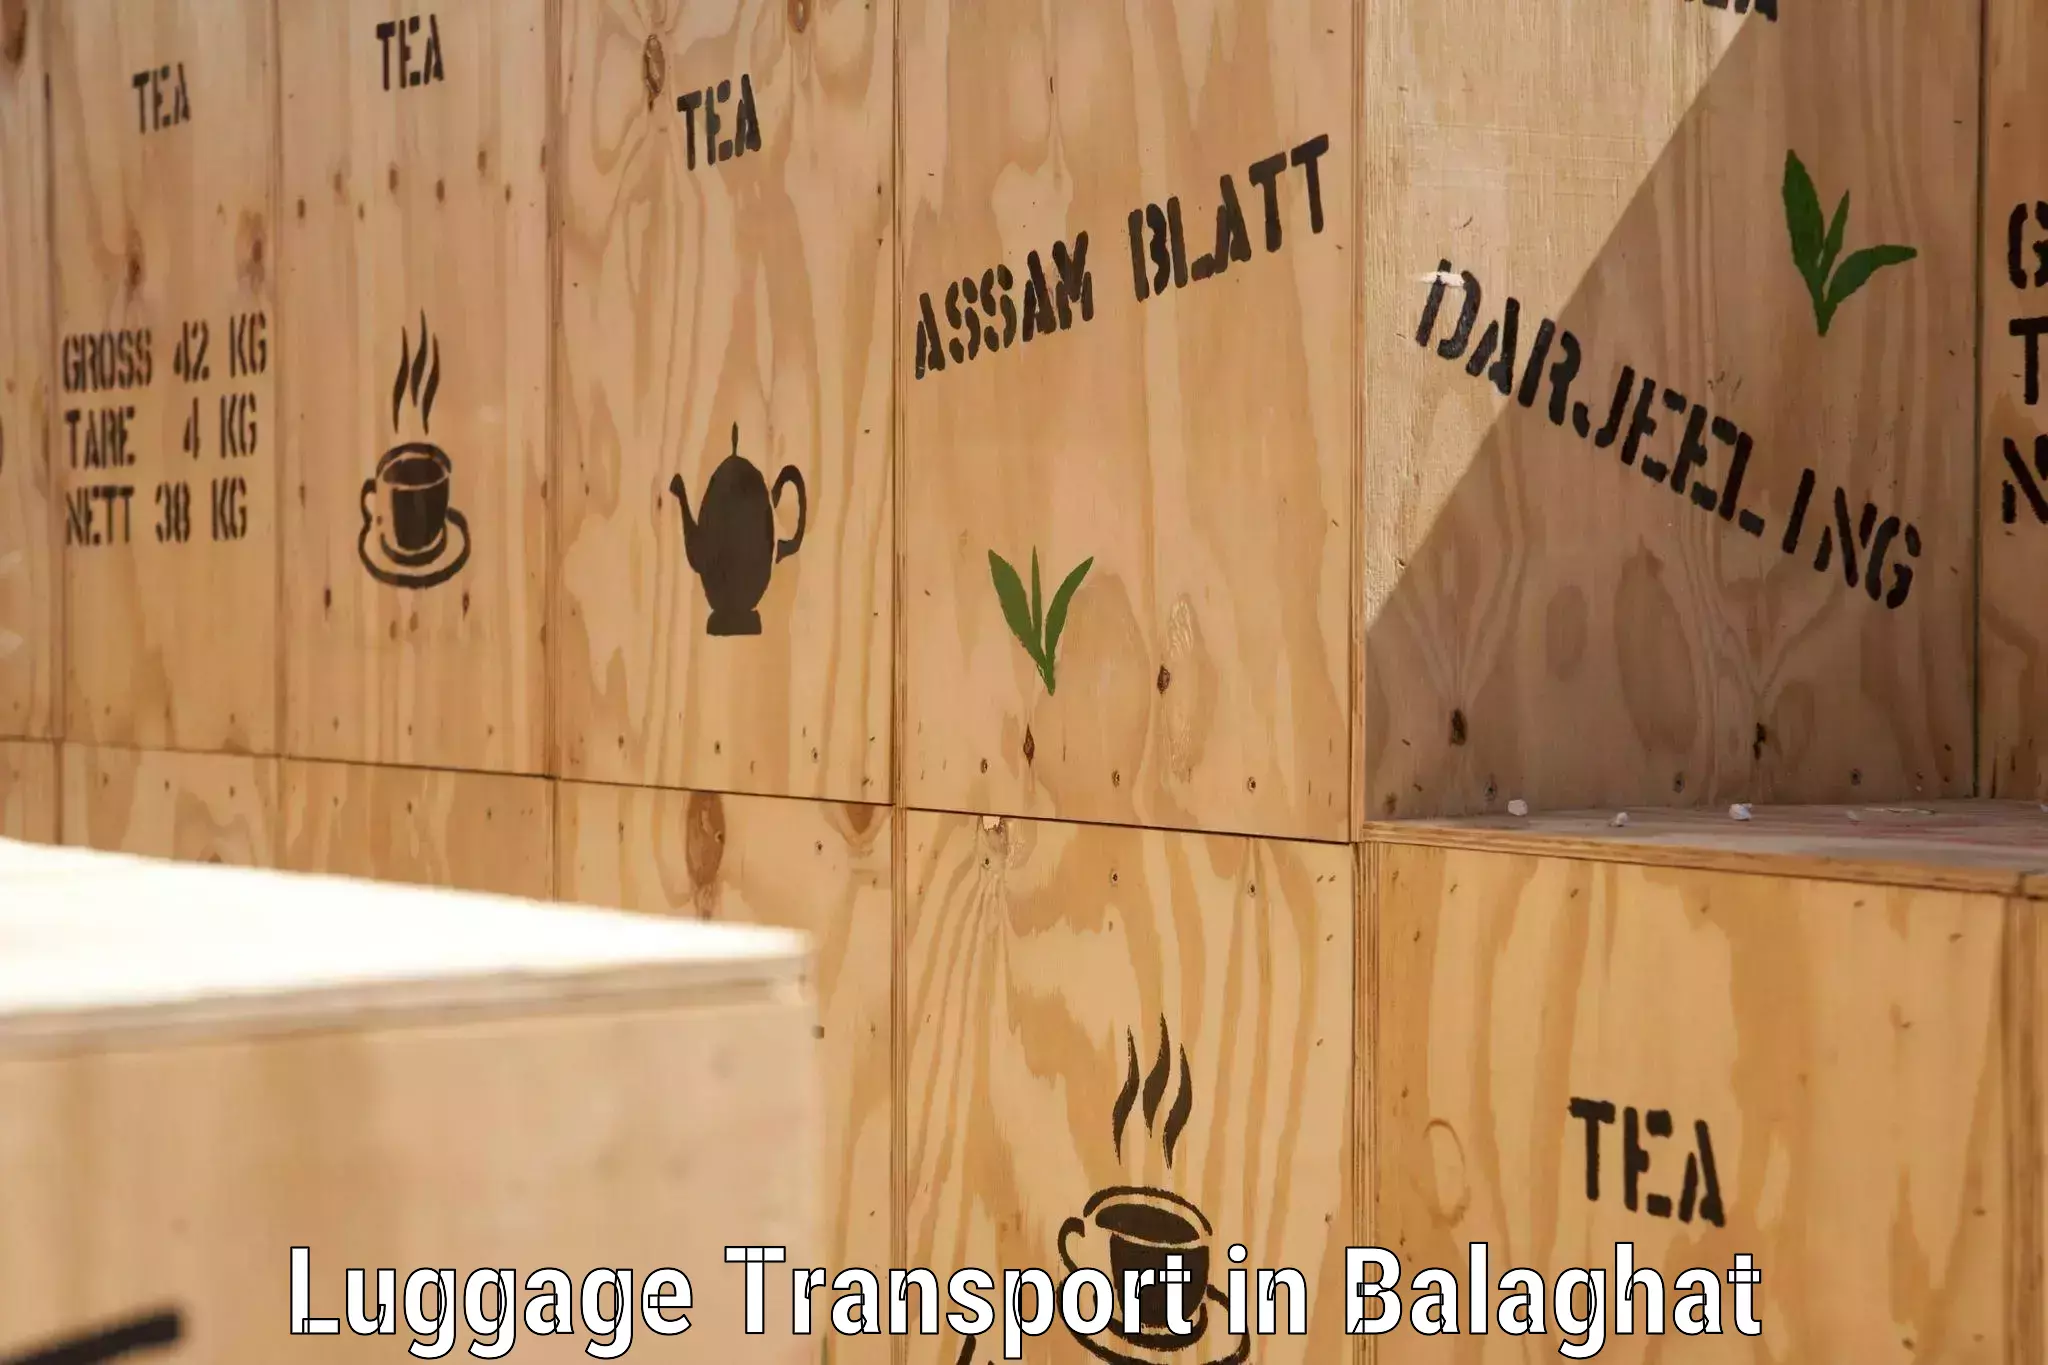 Luggage transport guidelines in Balaghat